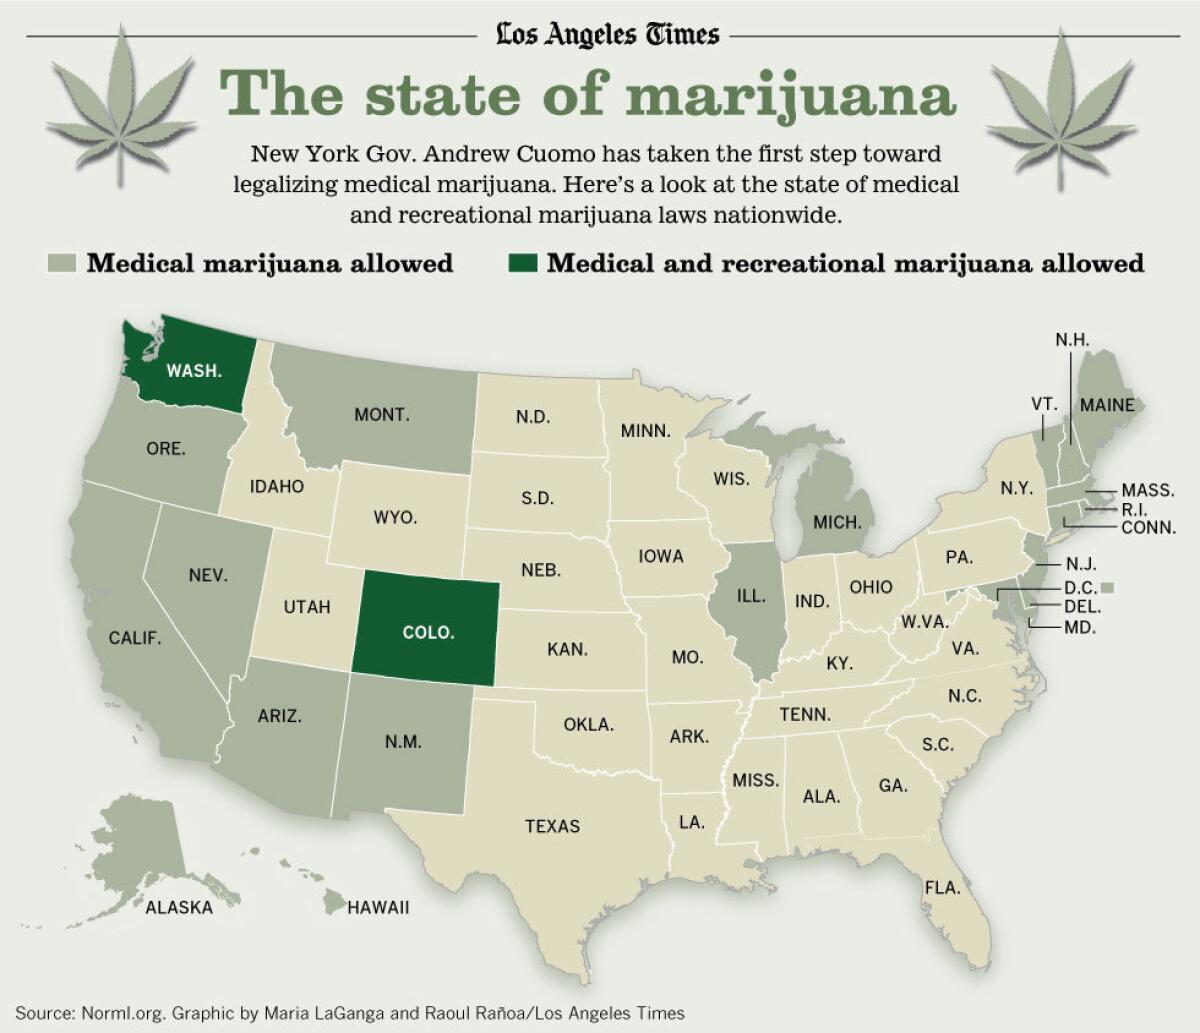 New York may be the next state to allow medical marijuana.